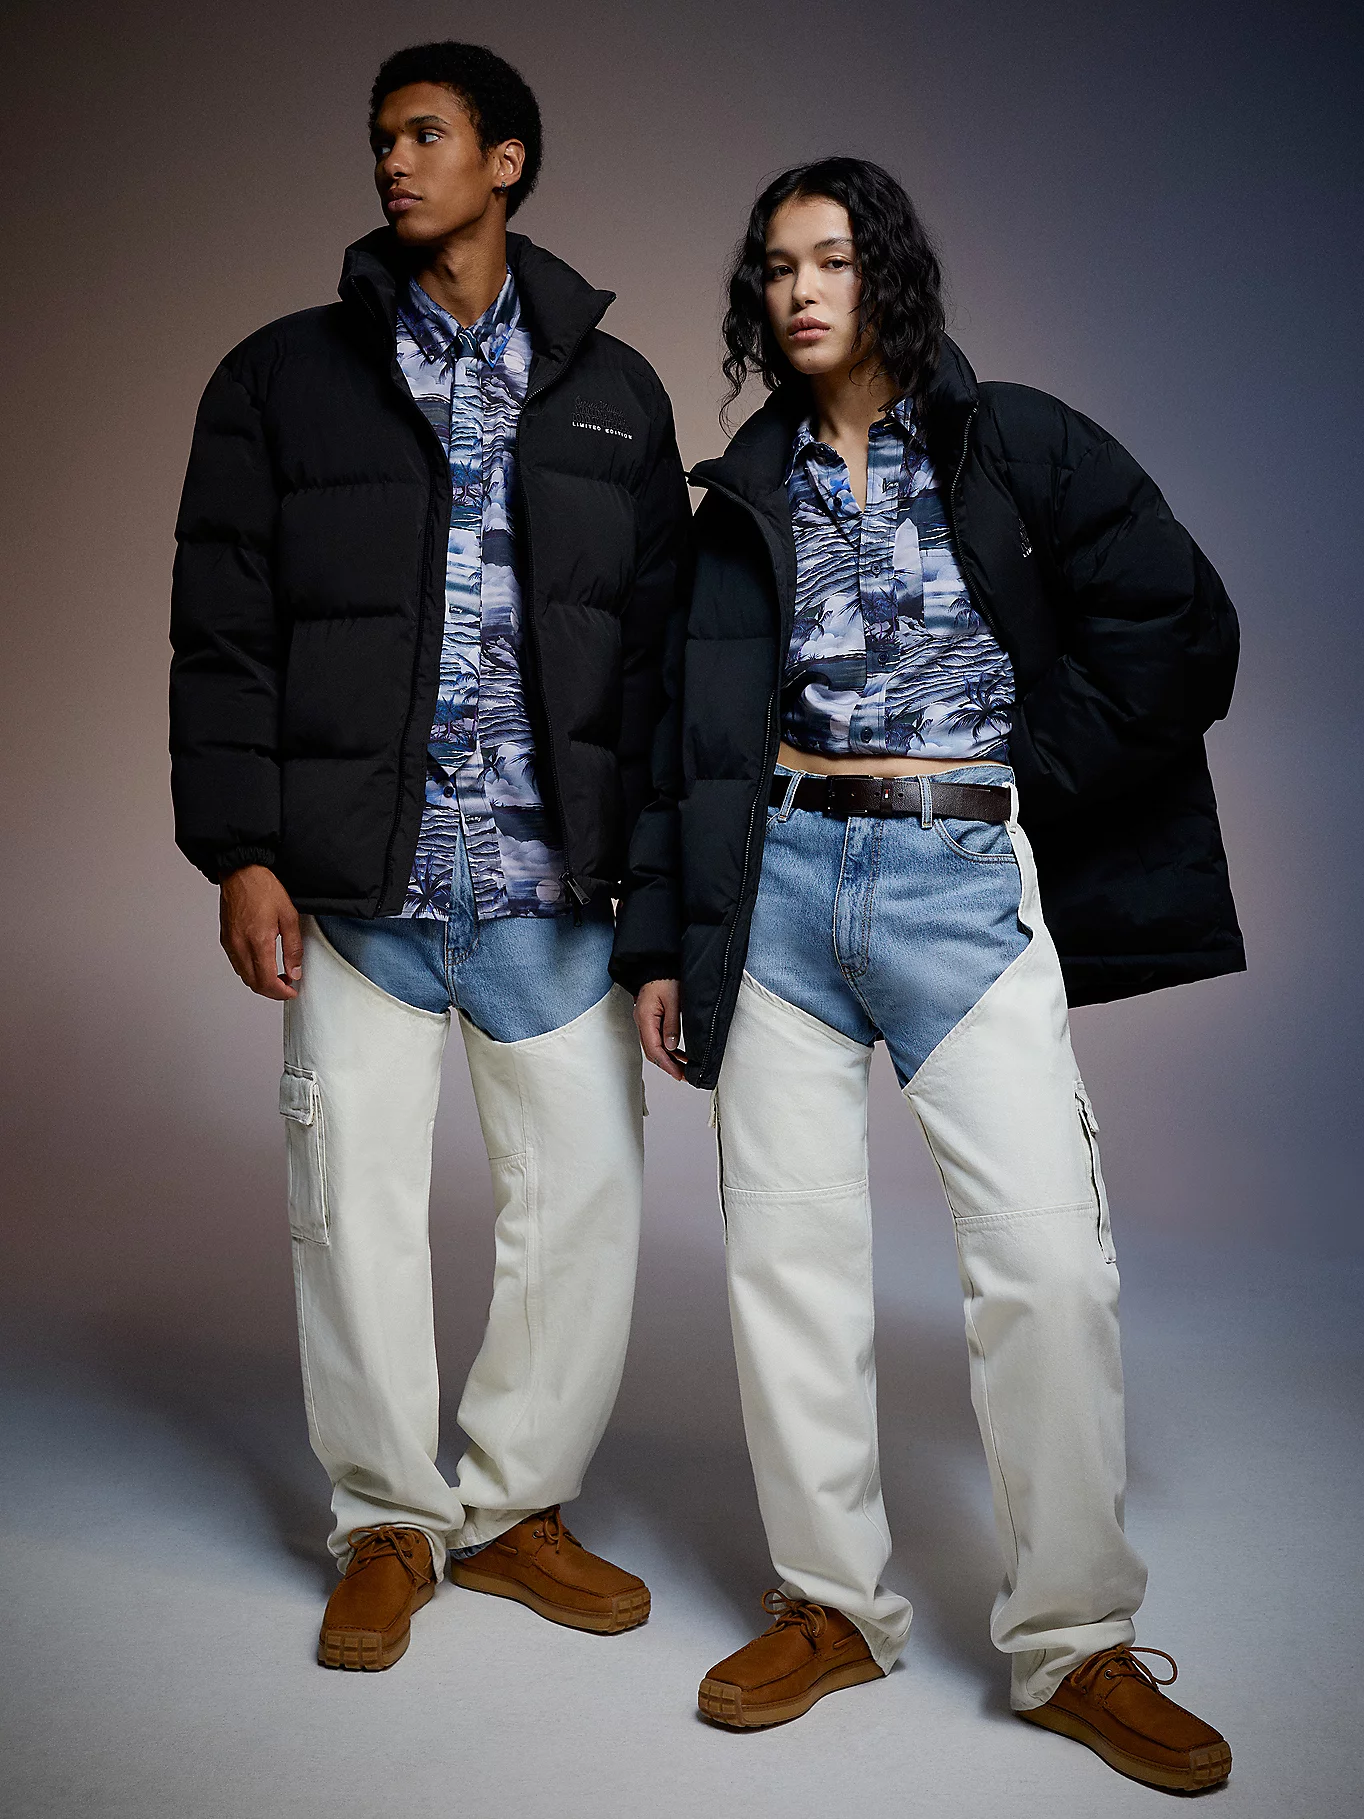 Tommy Hilfiger Jeans x Martine Rose Capsule Collection. - BlackBox Store